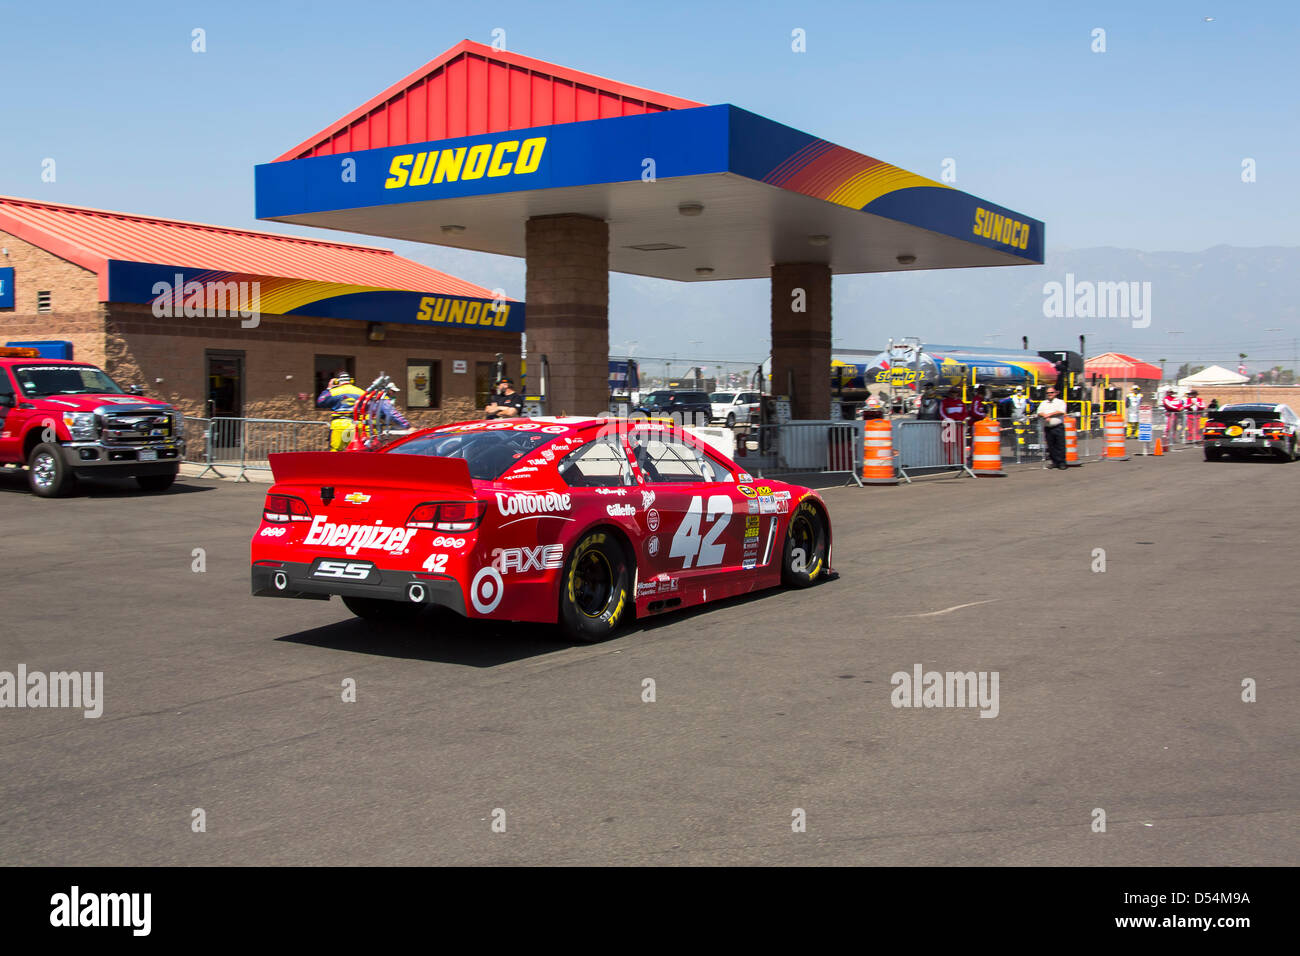 Fontana, California, USA. 23rd March 2013. The NASCAR Sprint Cup teams prepare for a practice session for the Auto Club 400 at Auto Club Speedway in FONTANA, CA on {month name} 23, 2013. Credit:  Cal Sport Media / Alamy Live News Stock Photo